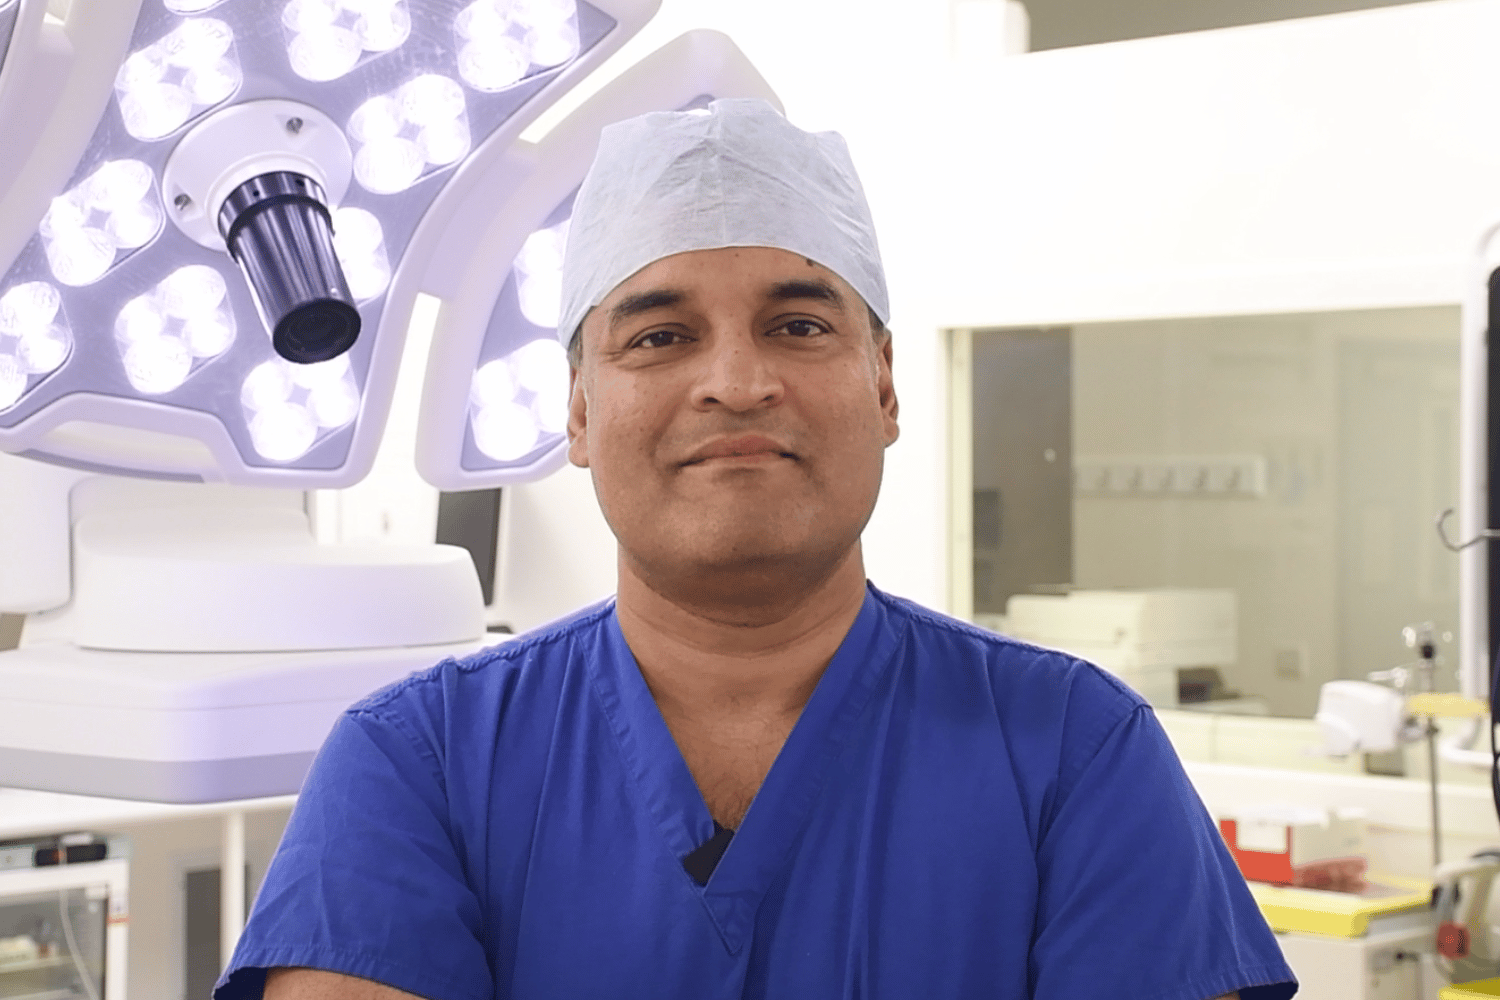 Shakil wearing blue scrubs and a theatre cap, smiling, with a theatre light behind him.